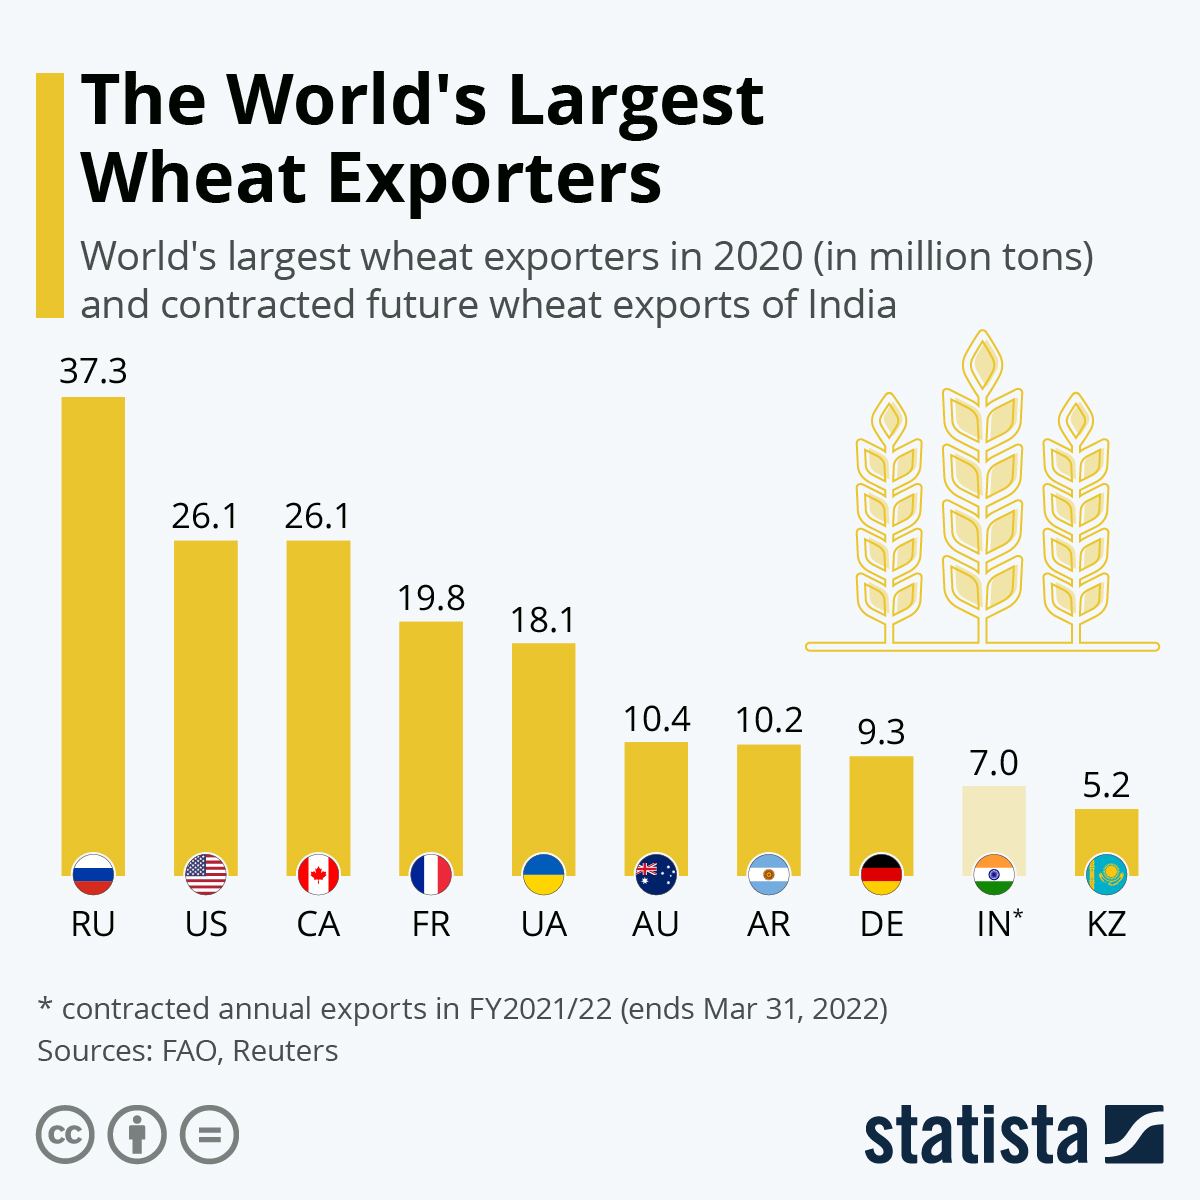 The Biggest Exporters of Wheat in the World